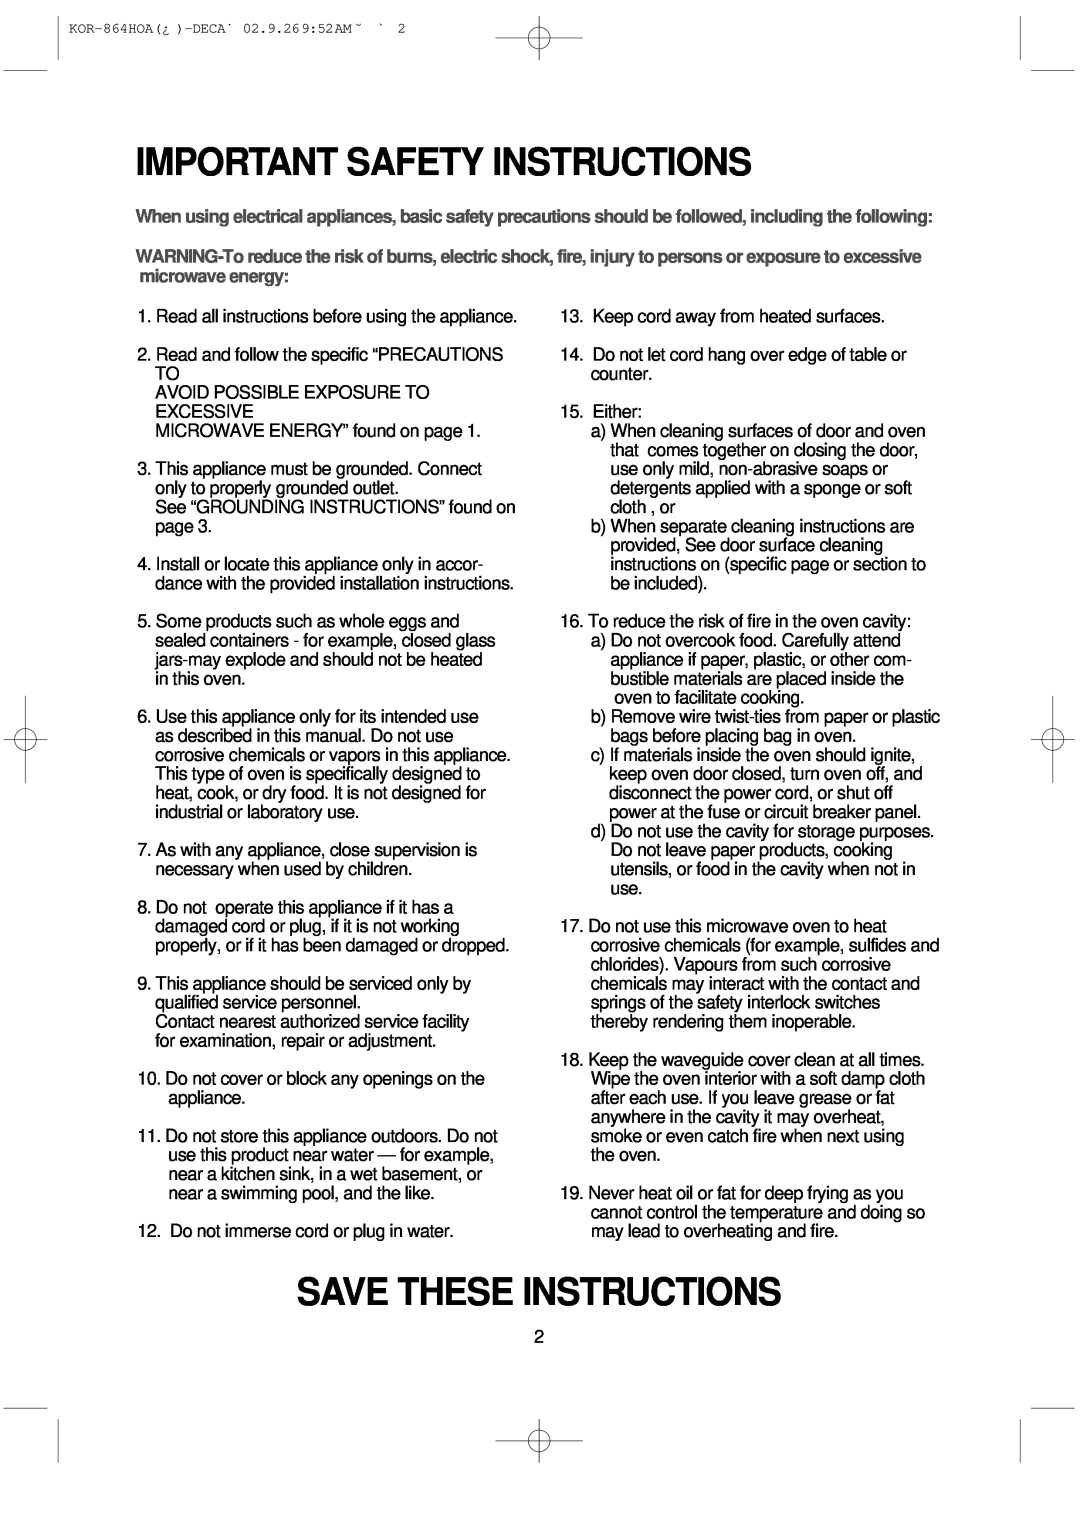 Daewoo KOR-864H operating instructions Important Safety Instructions, Save These Instructions 